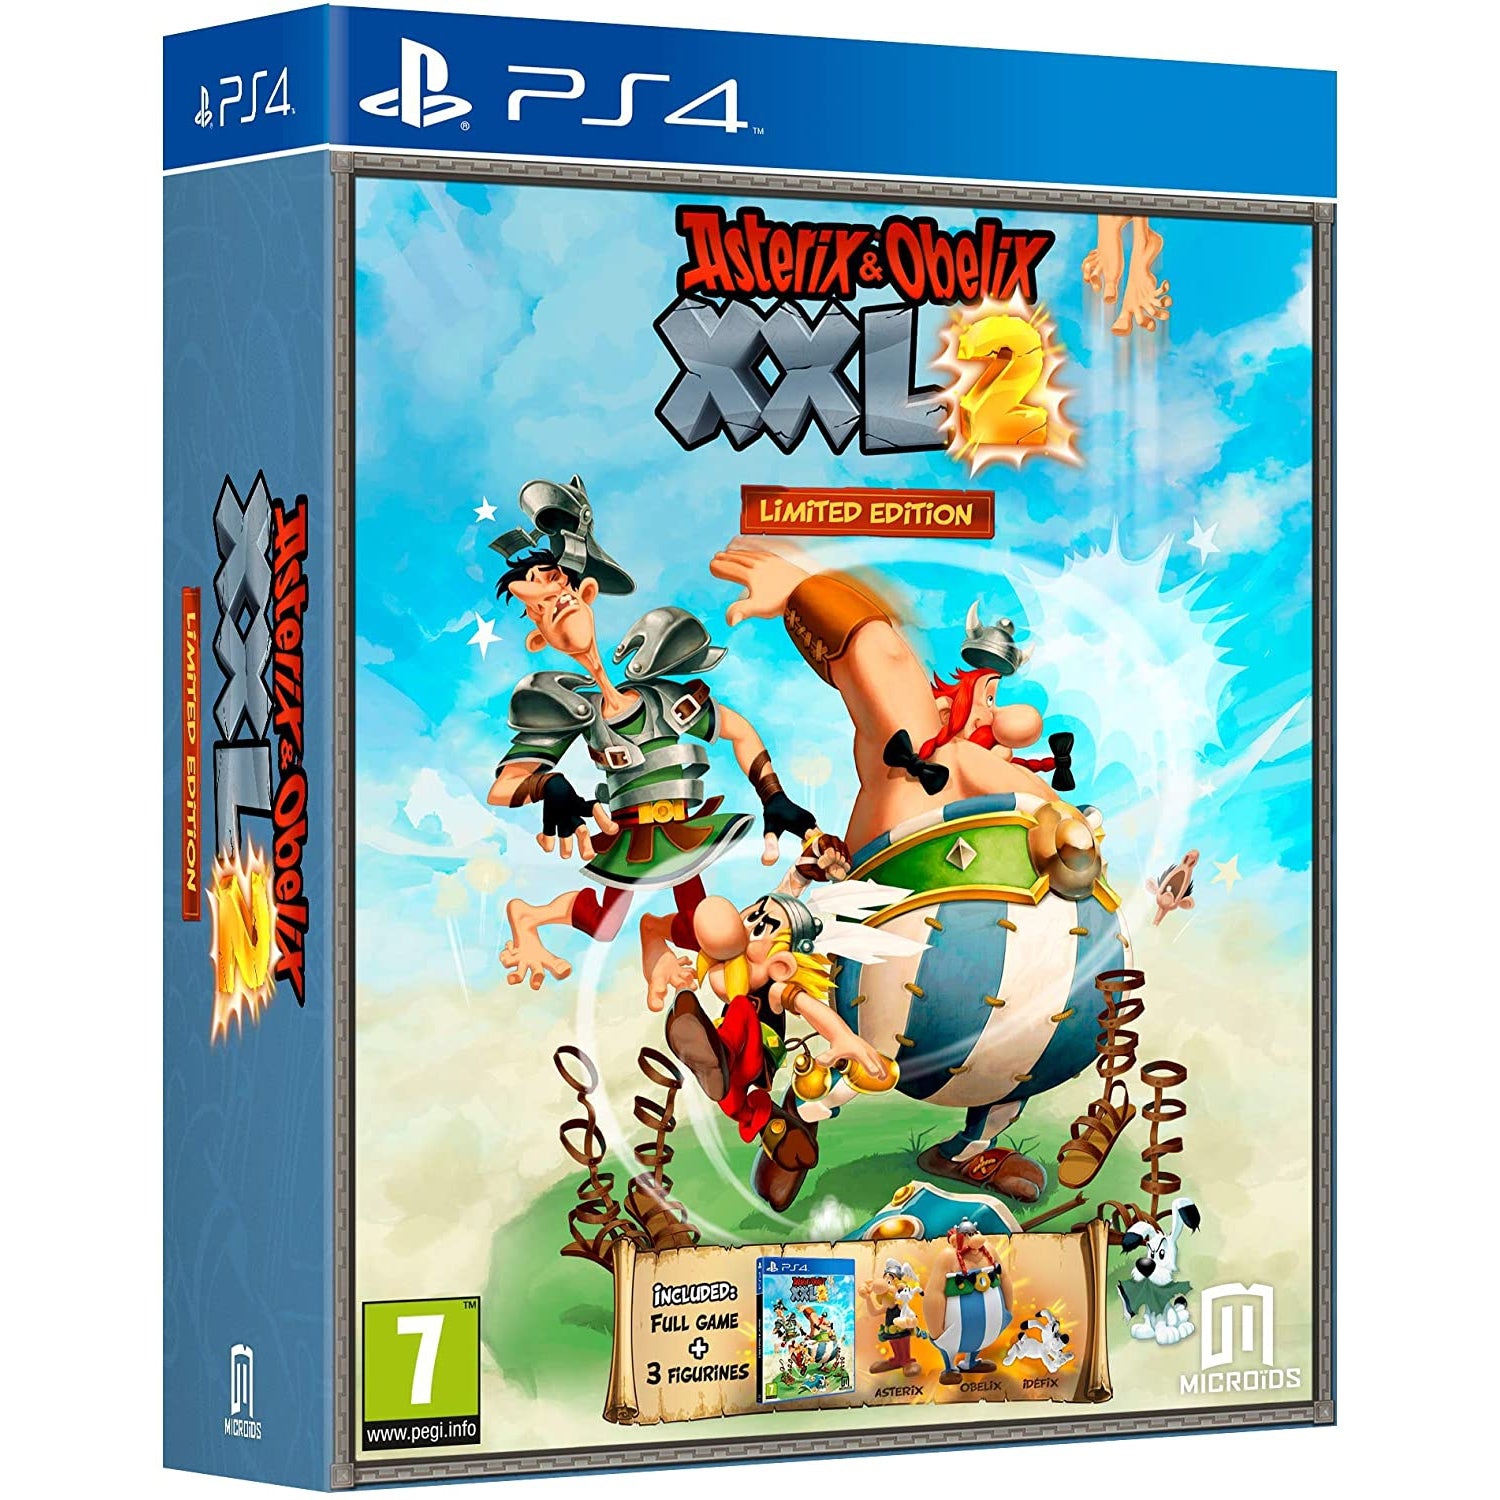 Asterix and Obelix XXL2 Limited Edition (PS4)